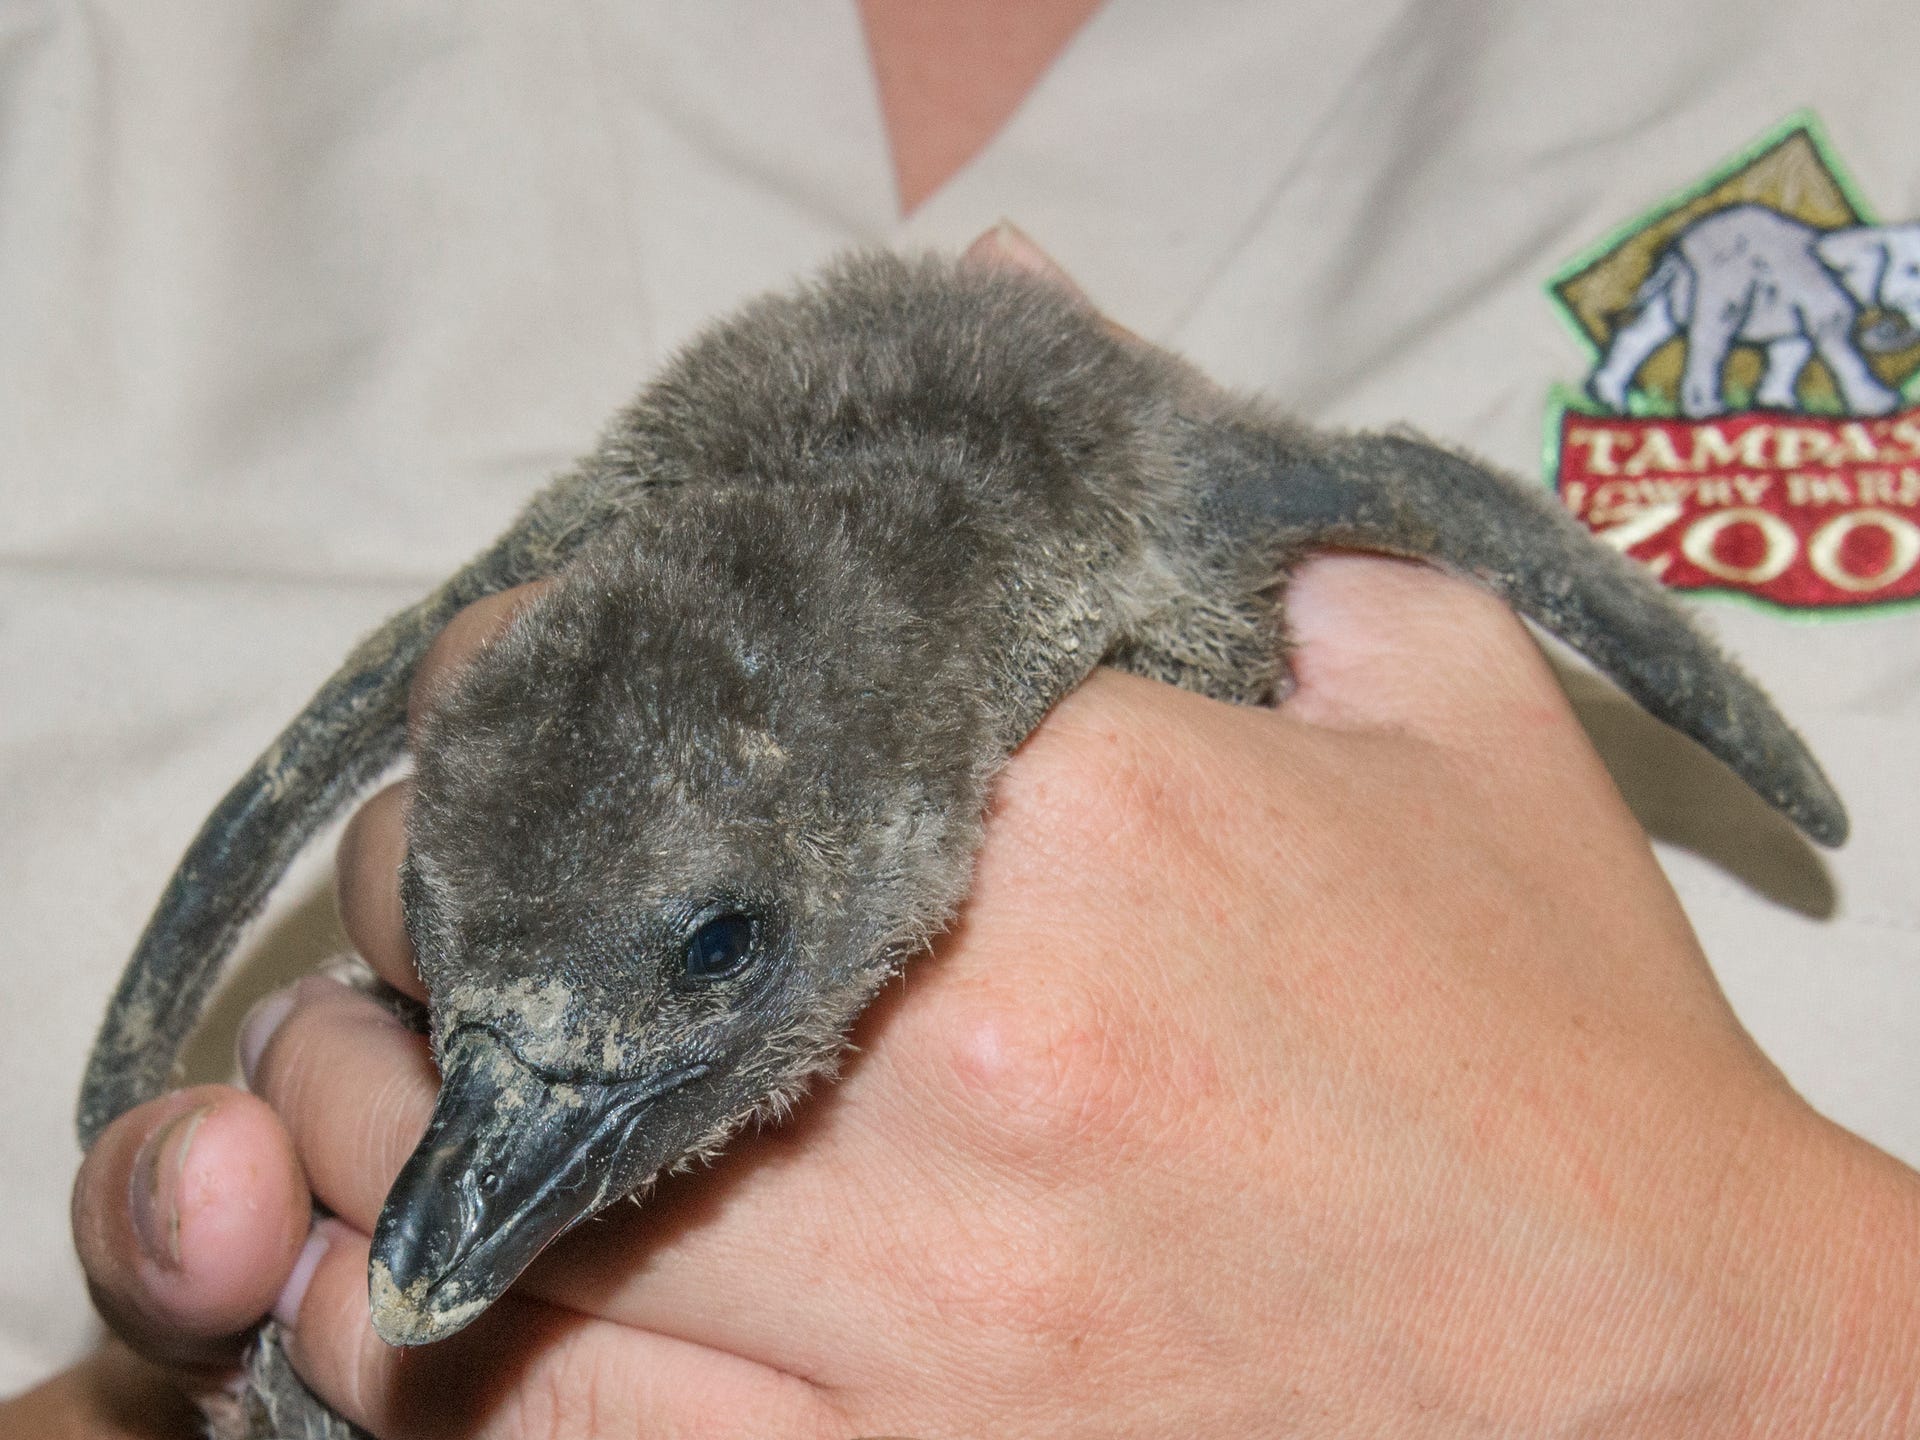 The ninth African Penguin chick was born at Lowry Park